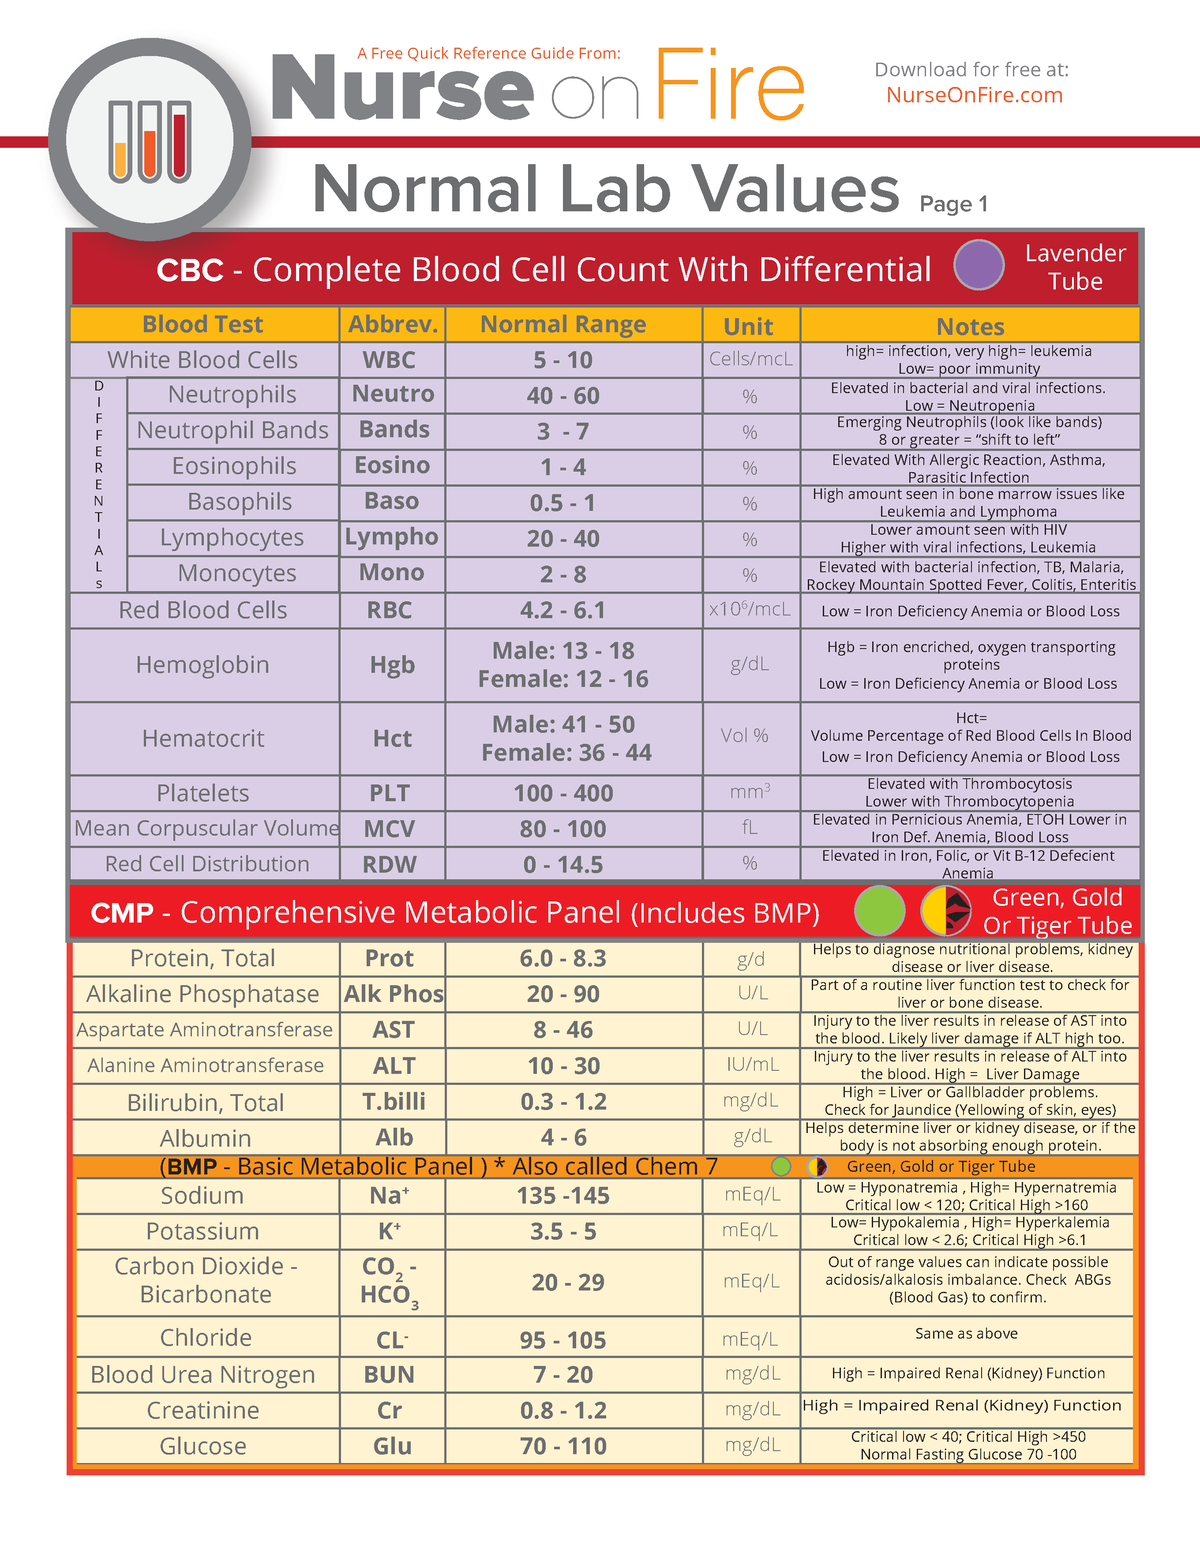 lab-values-made-easy-same-as-above-normal-lab-values-page-1-nurse